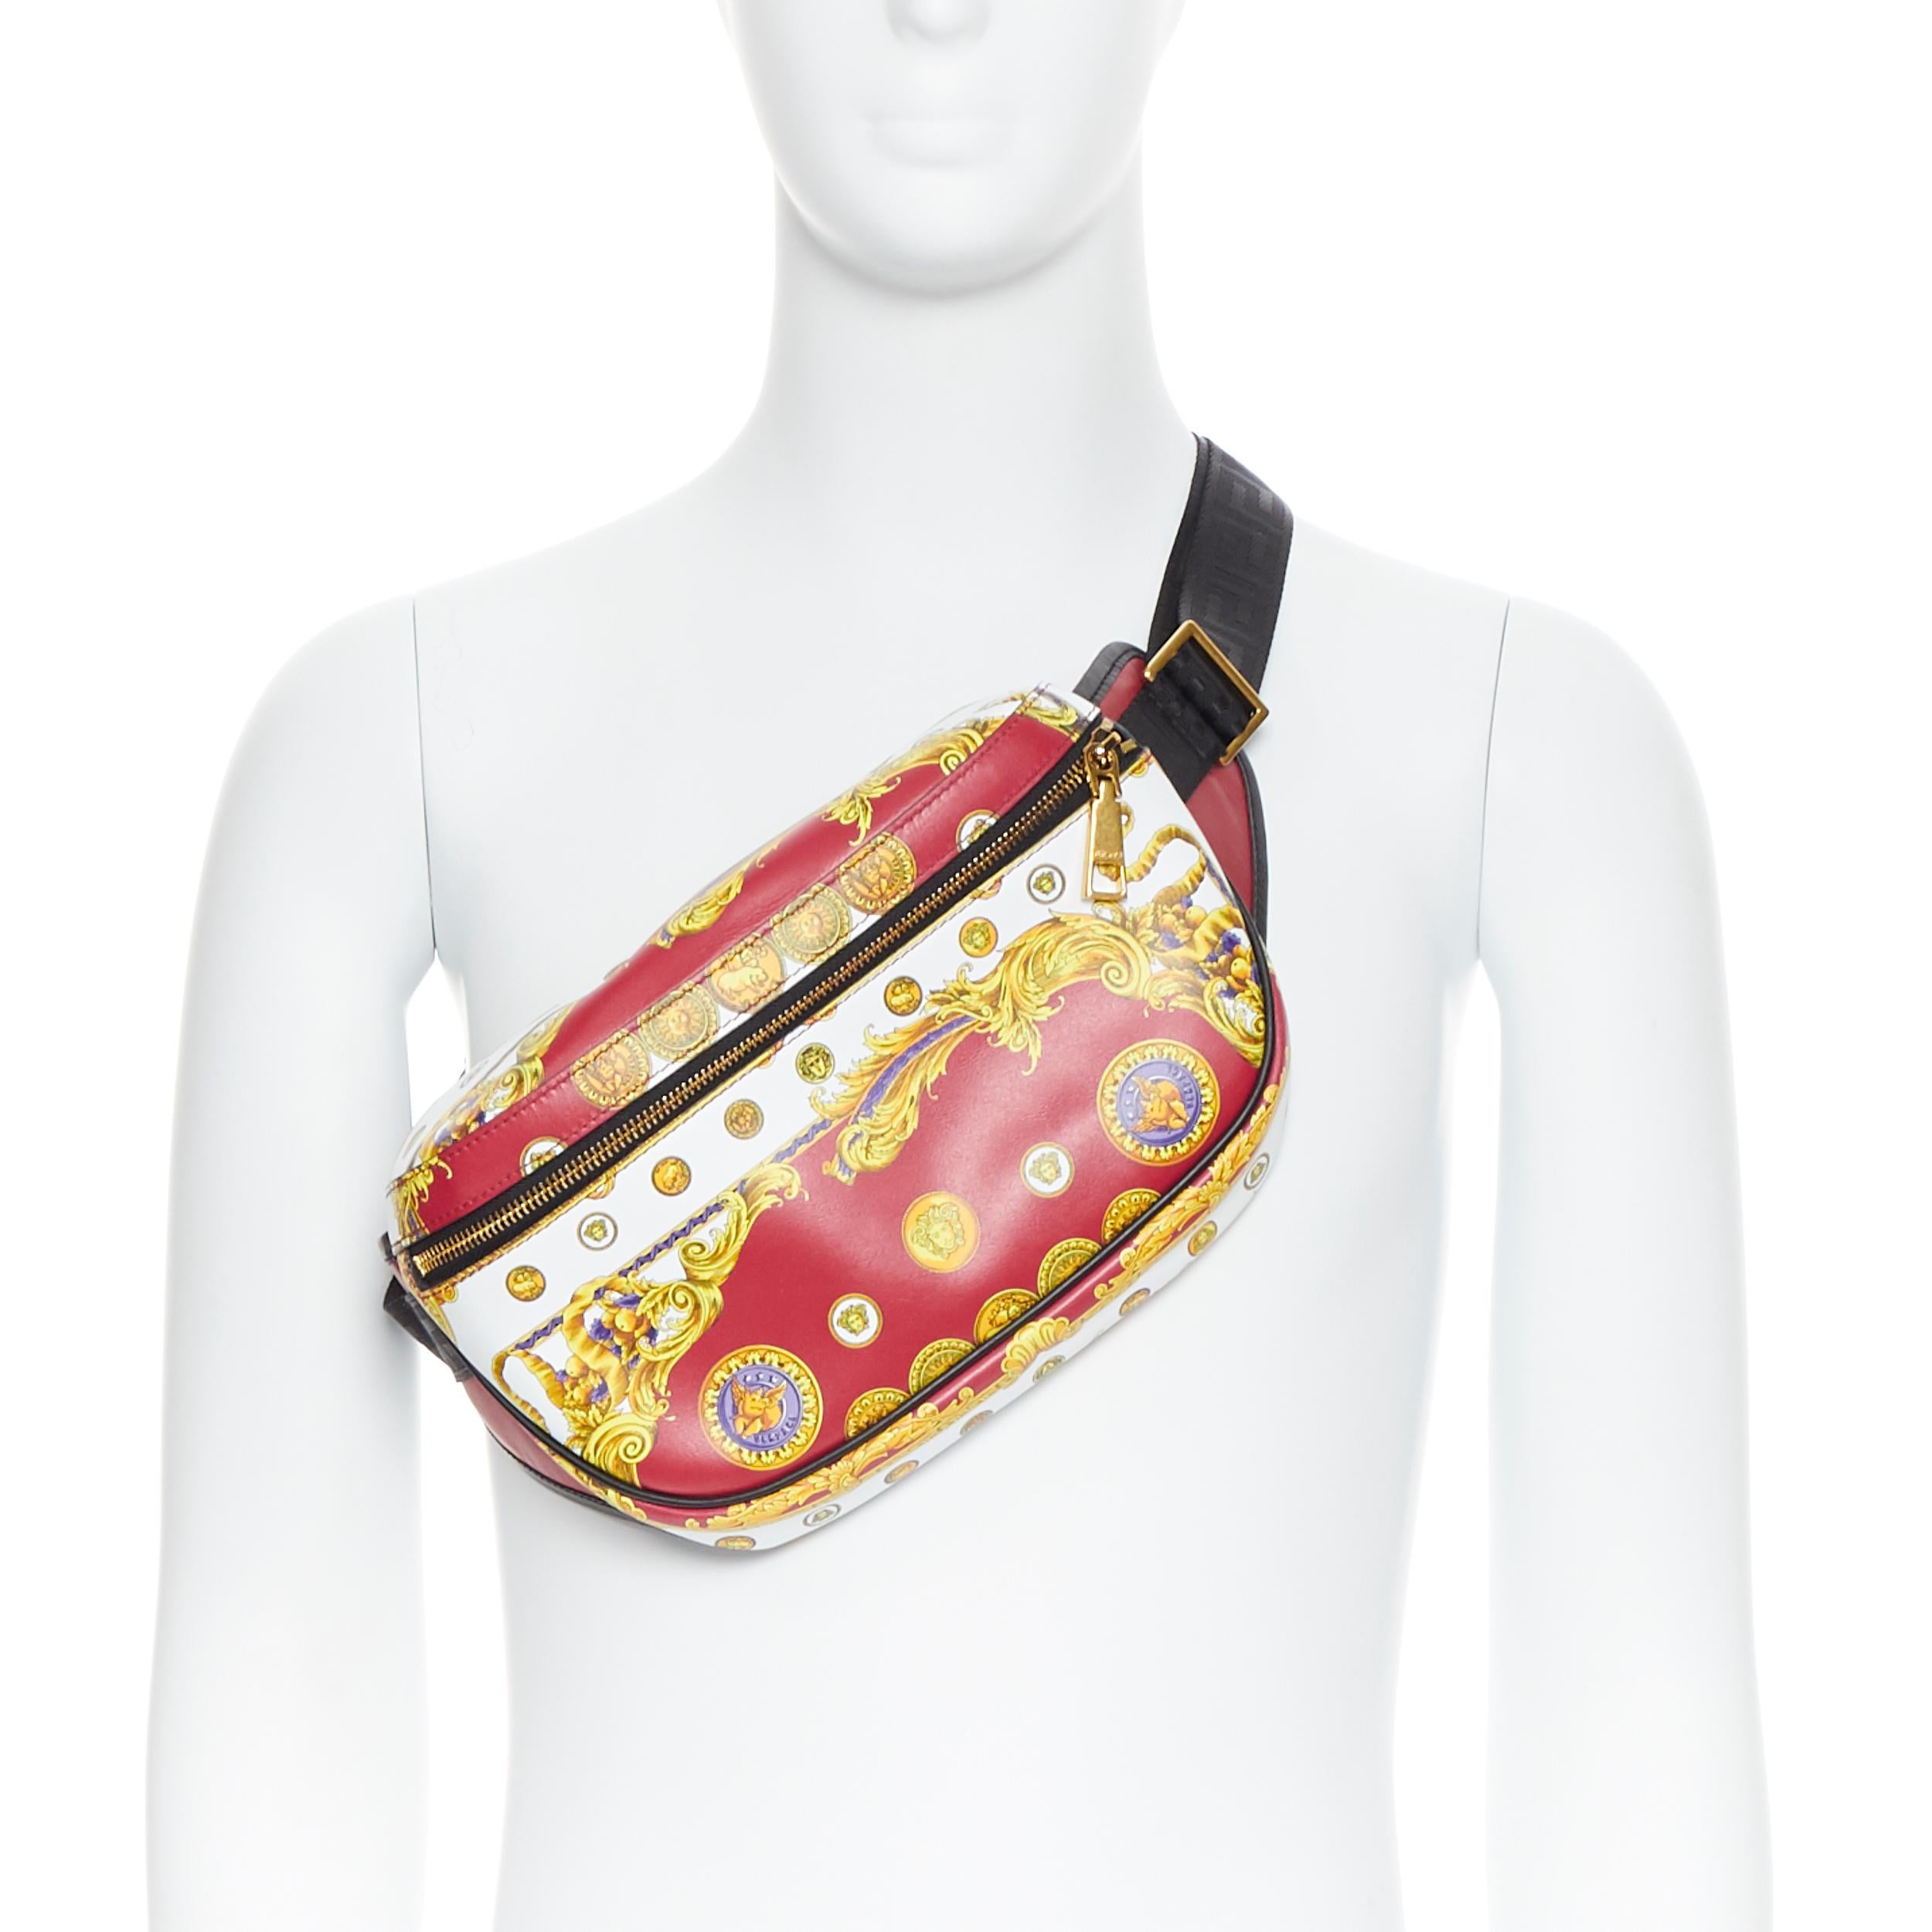 new VERSACE Royal Pig Medusa Medallion coin baroque print leather waist bag 
Brand: Versace
Designer: Donatella Versace
Collection: 2019
Model Name / Style: Leather waist bag
Material: Leather
Color: Red
Pattern: Abstract
Closure: Zip
Lining